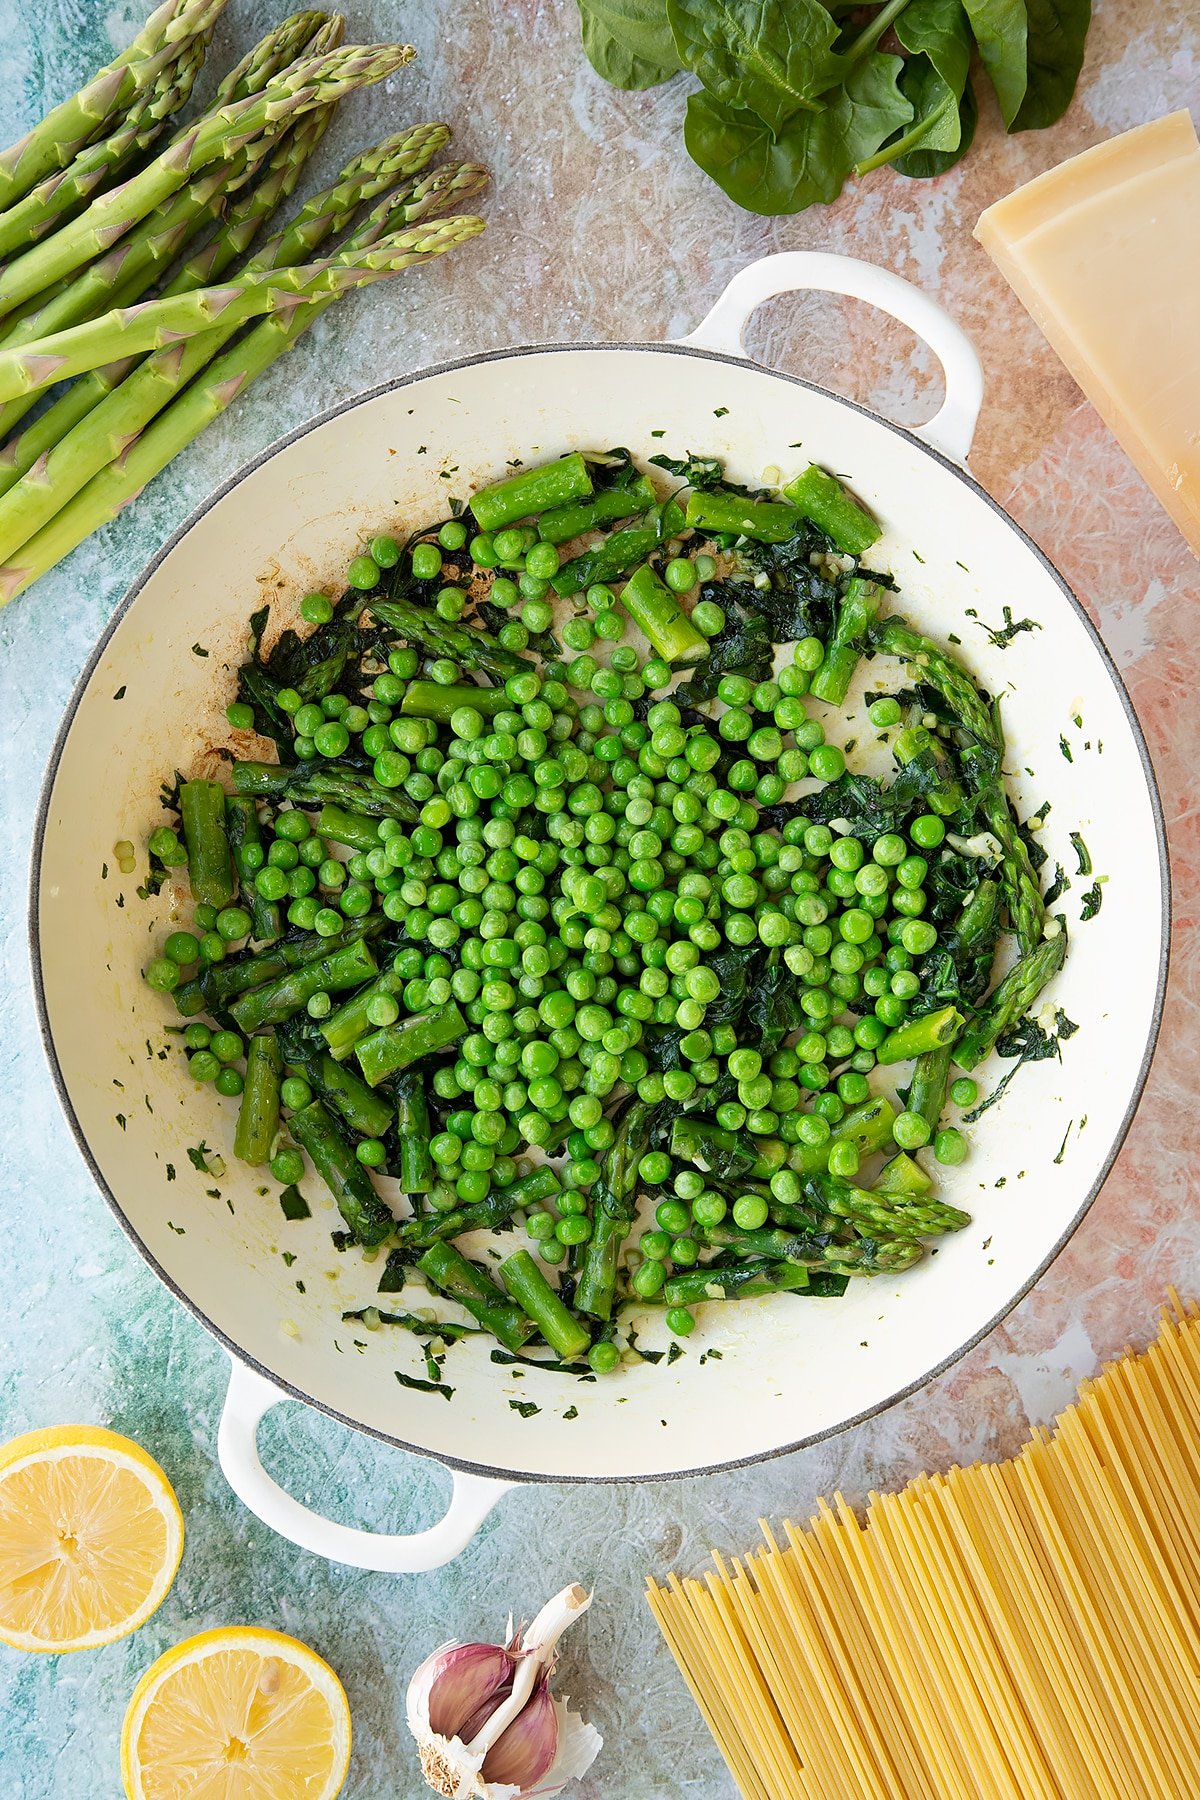 Lightly sautéed spinach, basil and asparagus with peas on top in a large, shallow saucepan. Ingredients to make summer spaghetti surround the pan.